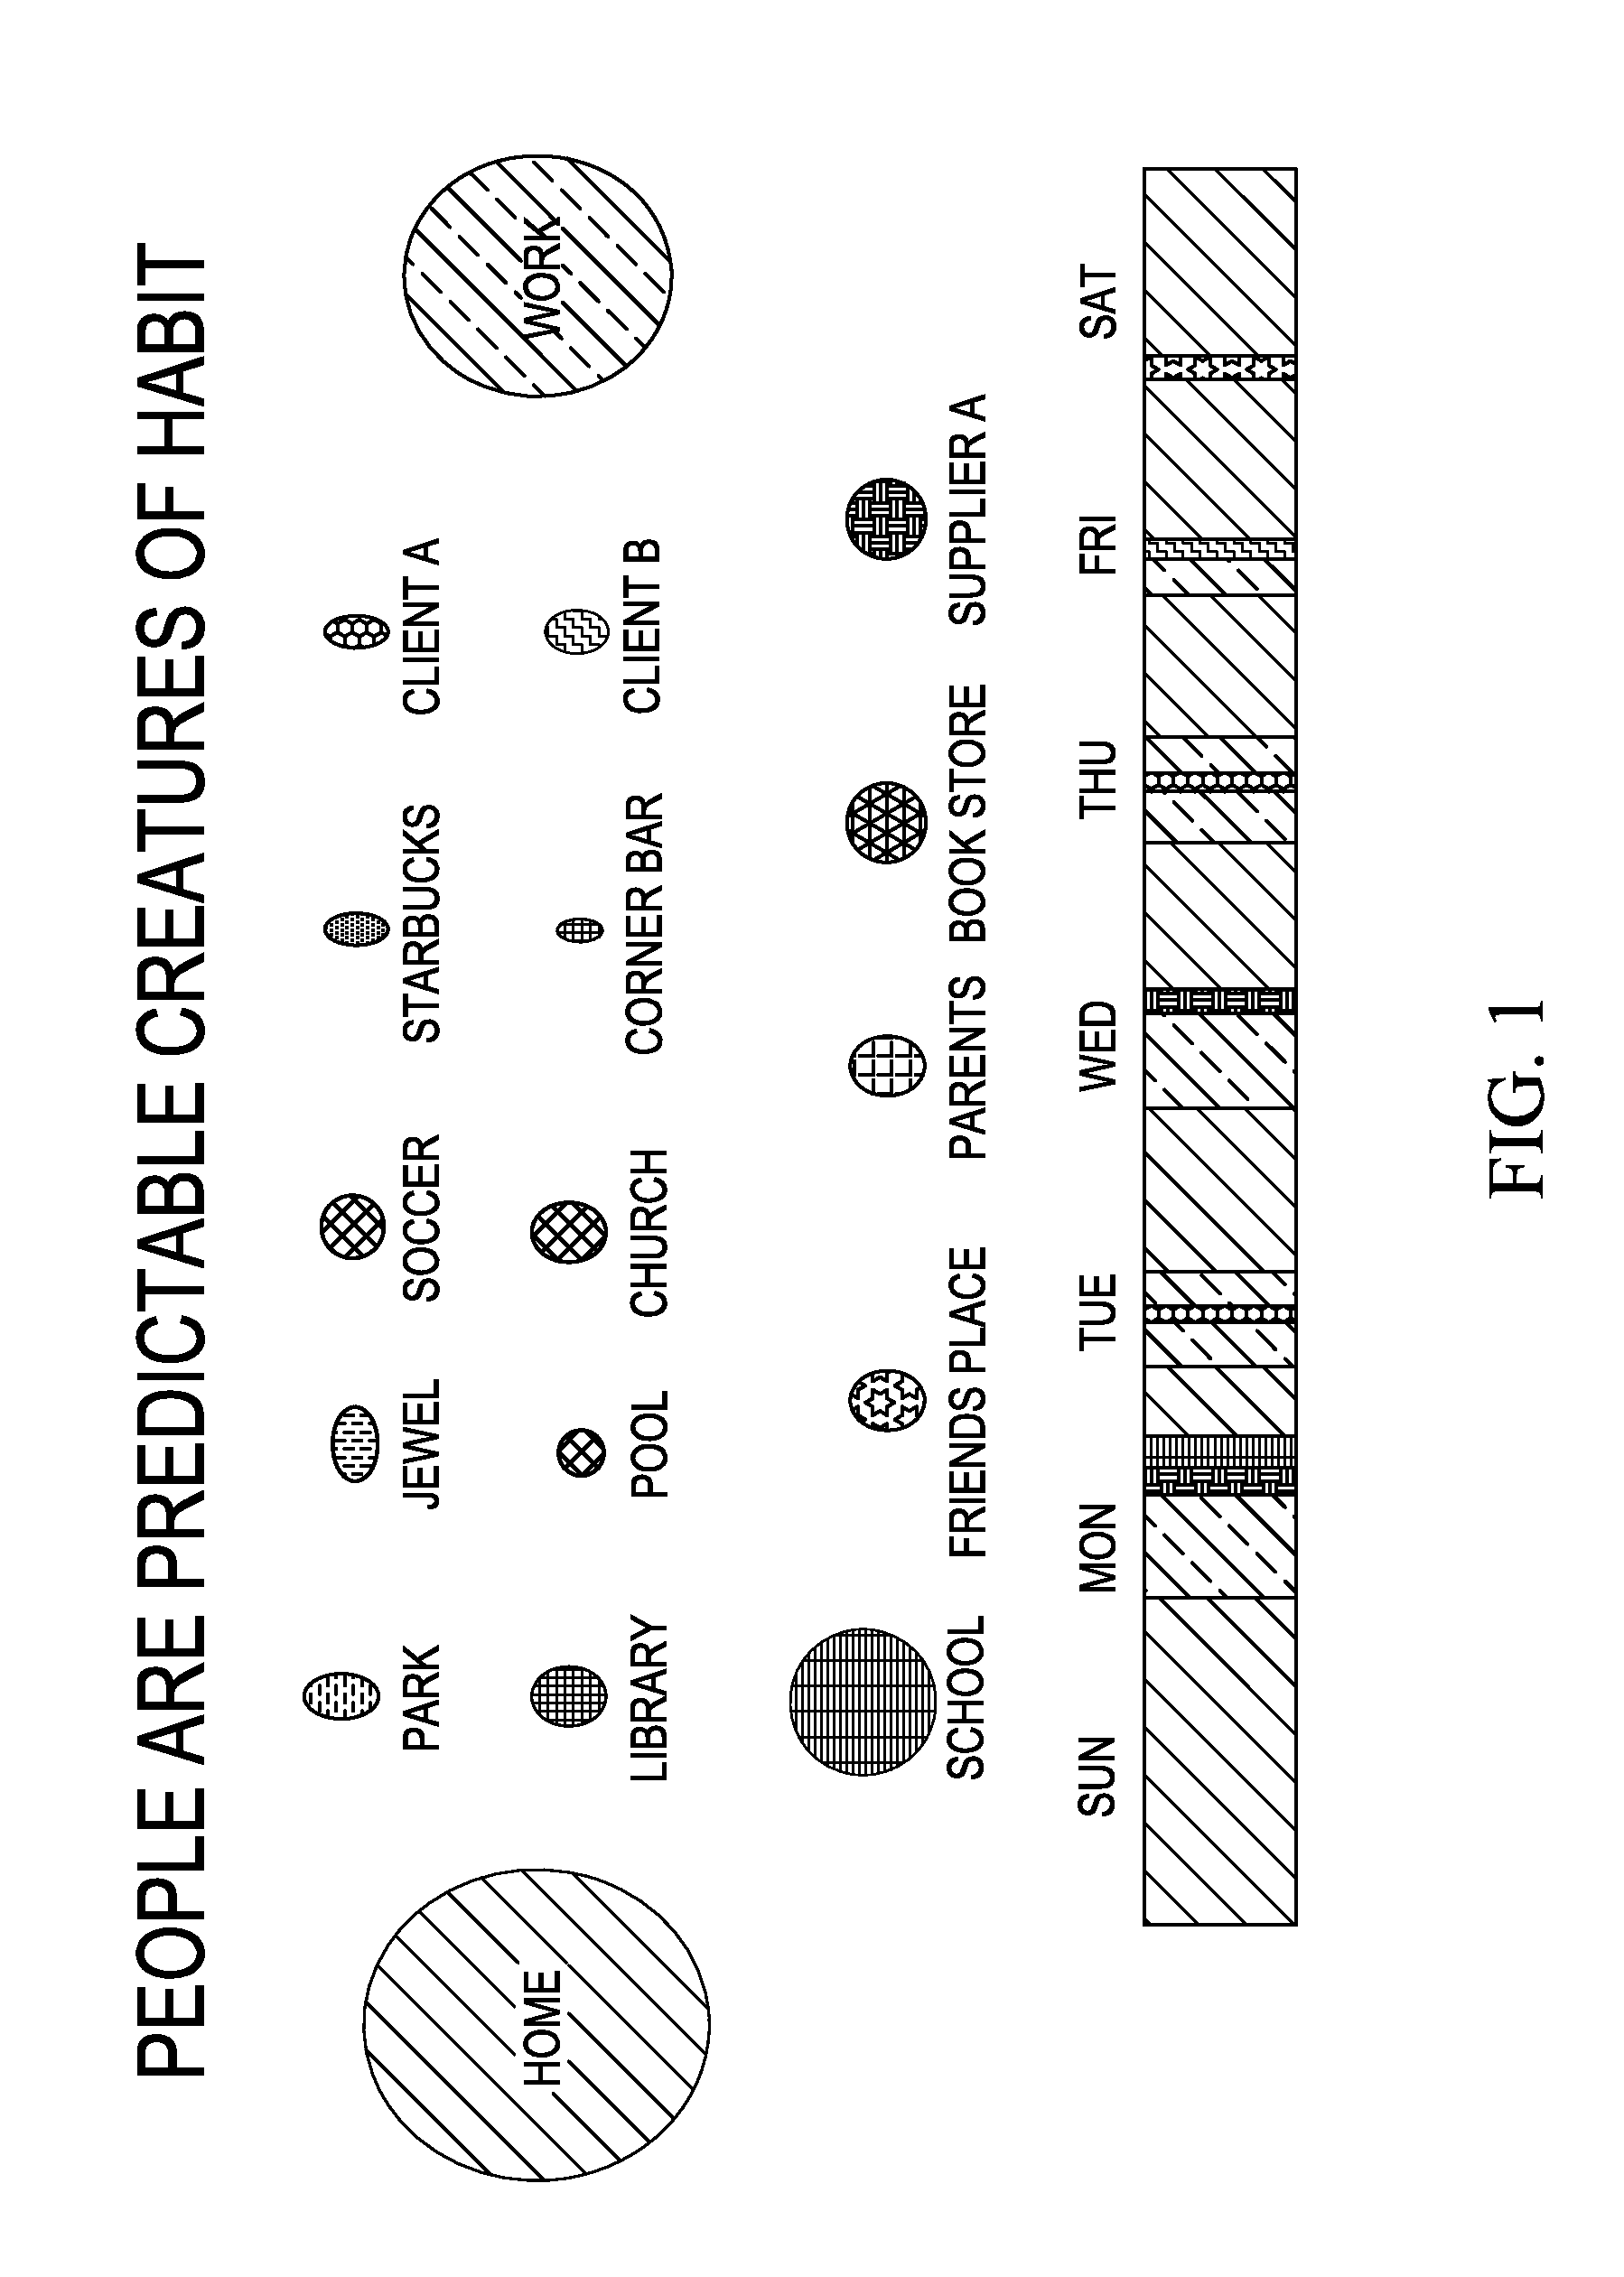 Method for improving discovery of preferred mobile computing locations